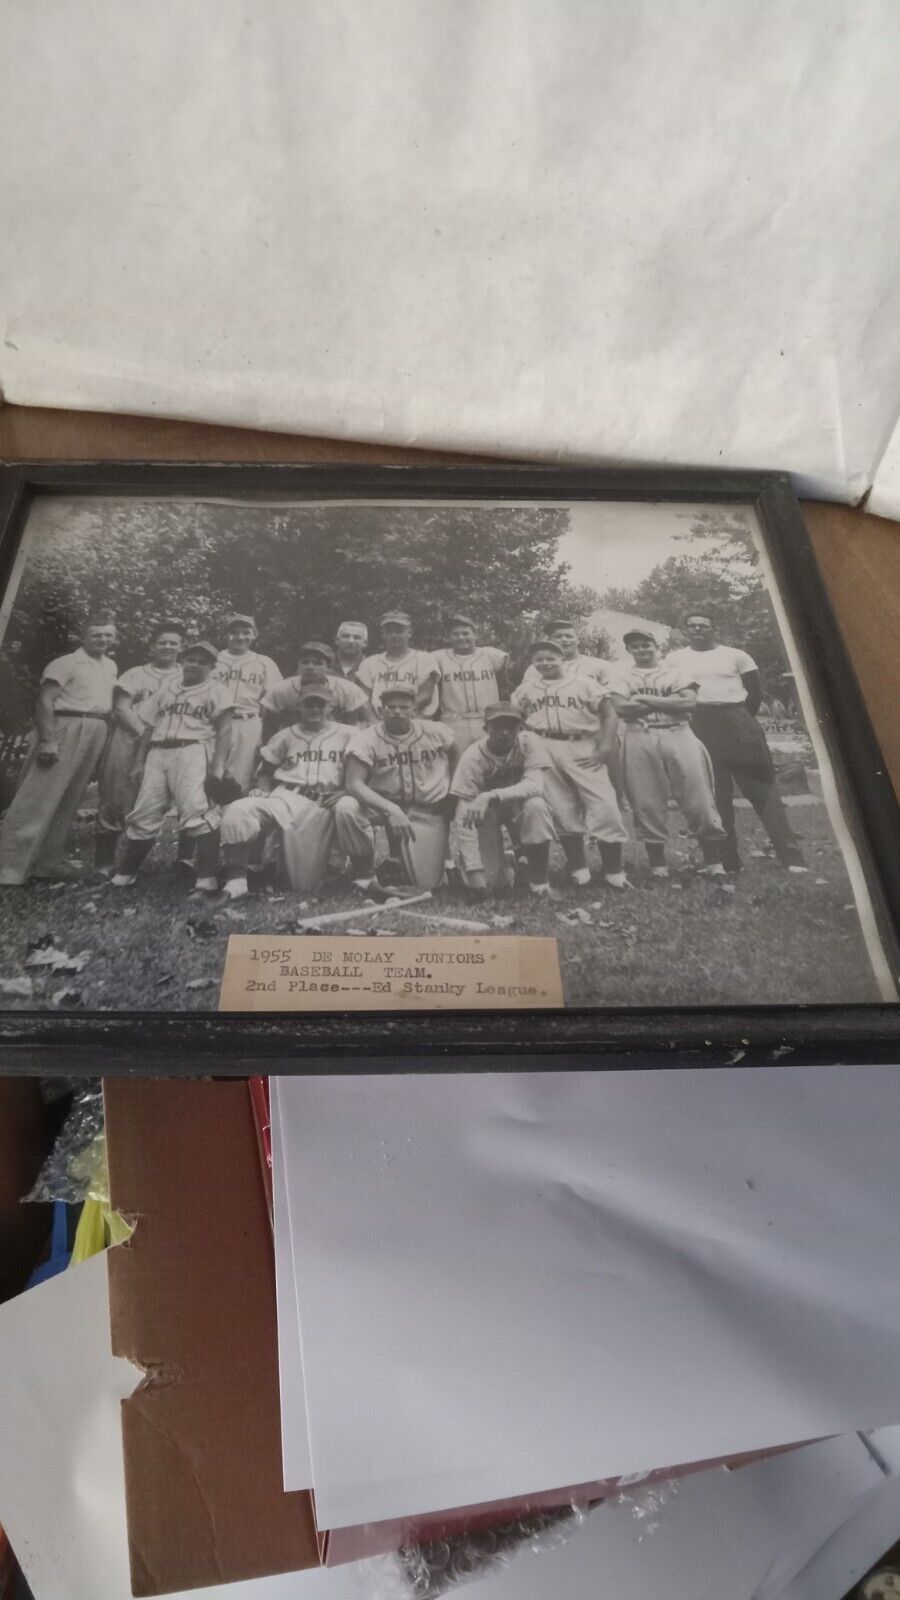 Antique Masonic 1955 DeMolay 2nd Place Ed Stanky League  Baseball Picture Framed